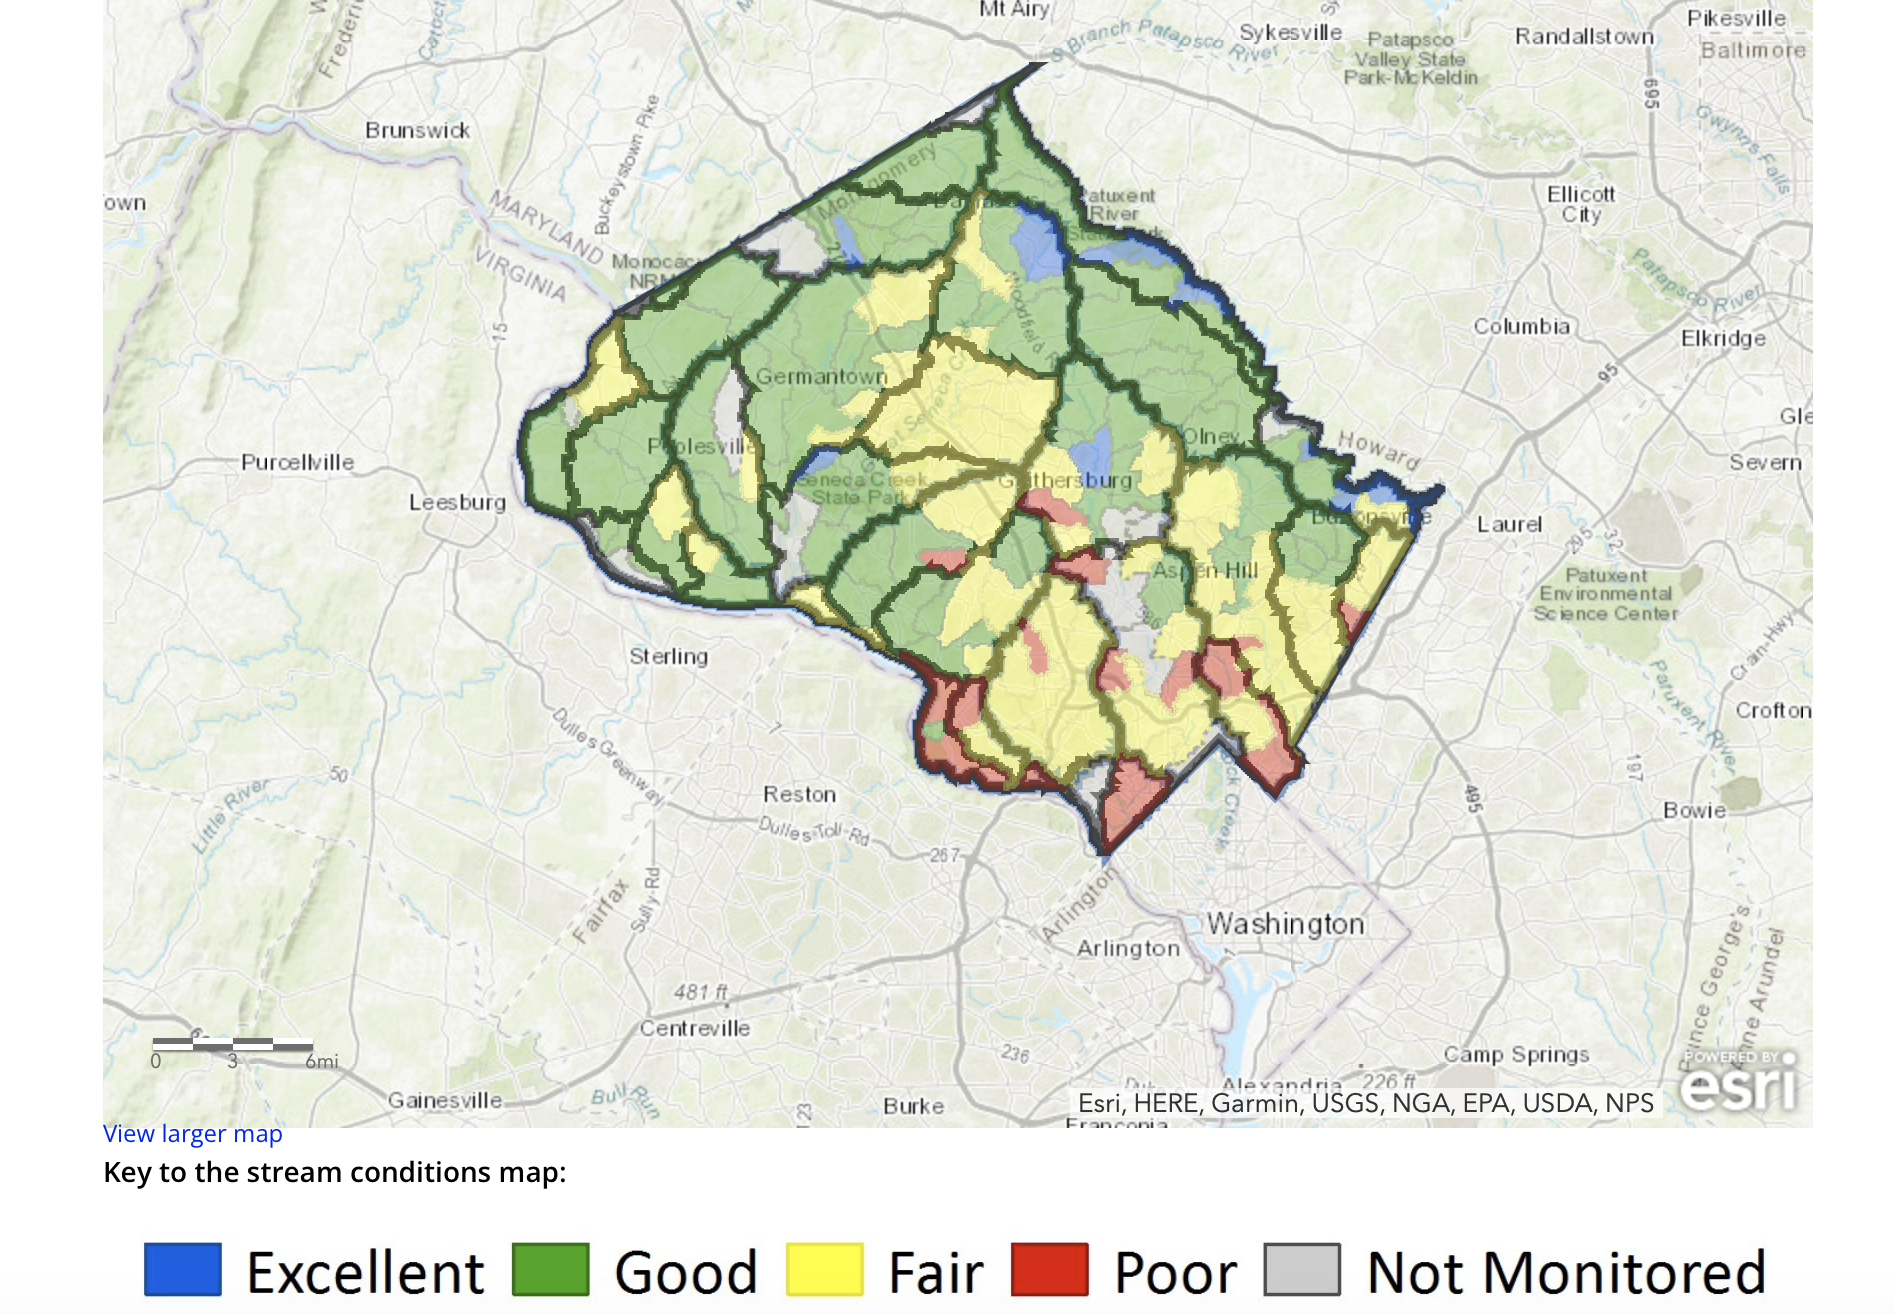 A map showing Montgomery County has colored in districts, ranging colors from blue to red to show stream health condition.